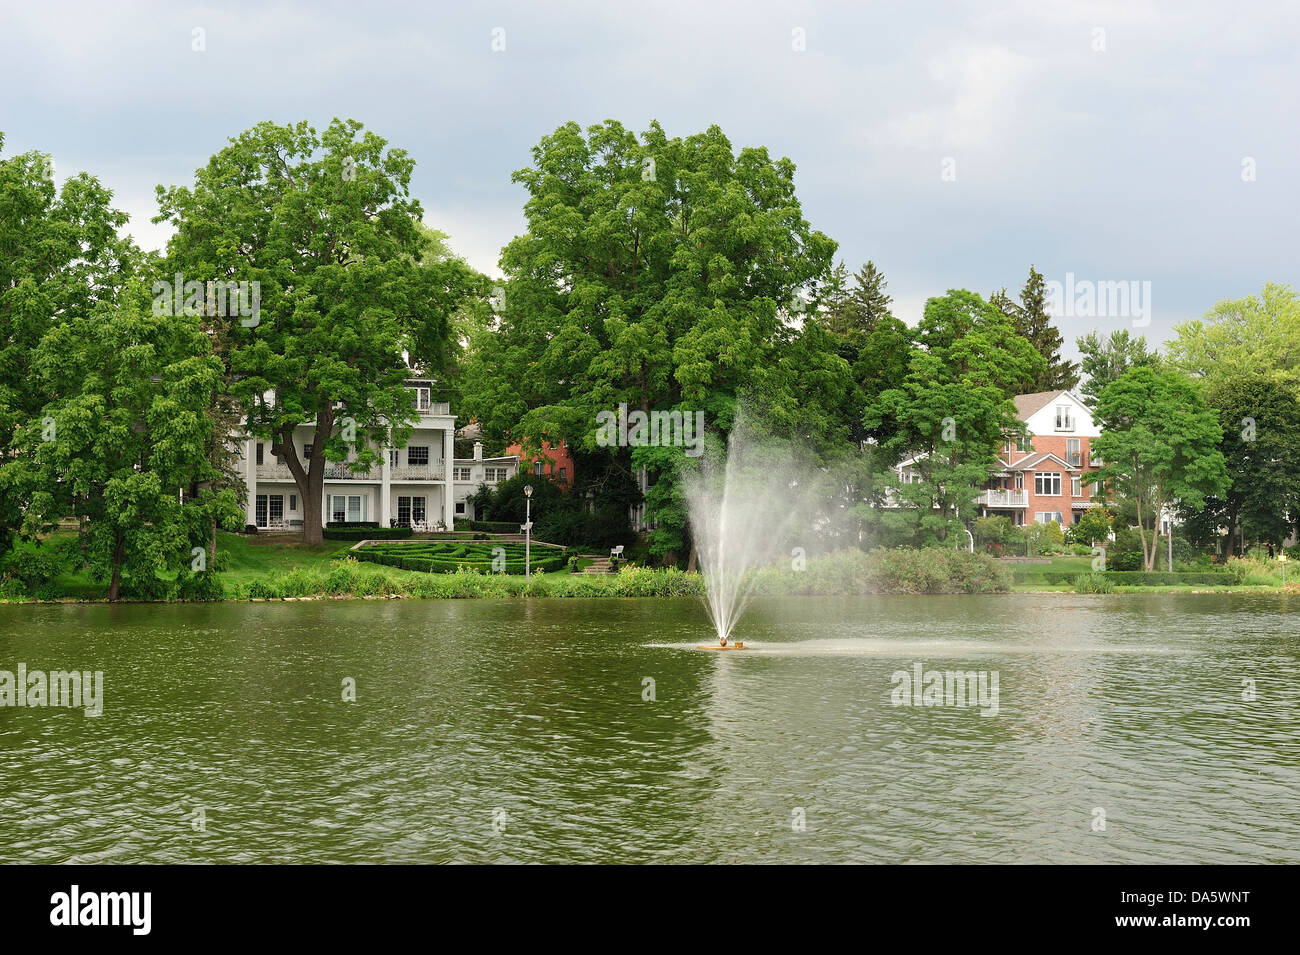 Avon River, river, Canada, Ontario, Stratford, Travel, Trees, along river, buildings, day, day time, foliage, fountain, grass, h Stock Photo